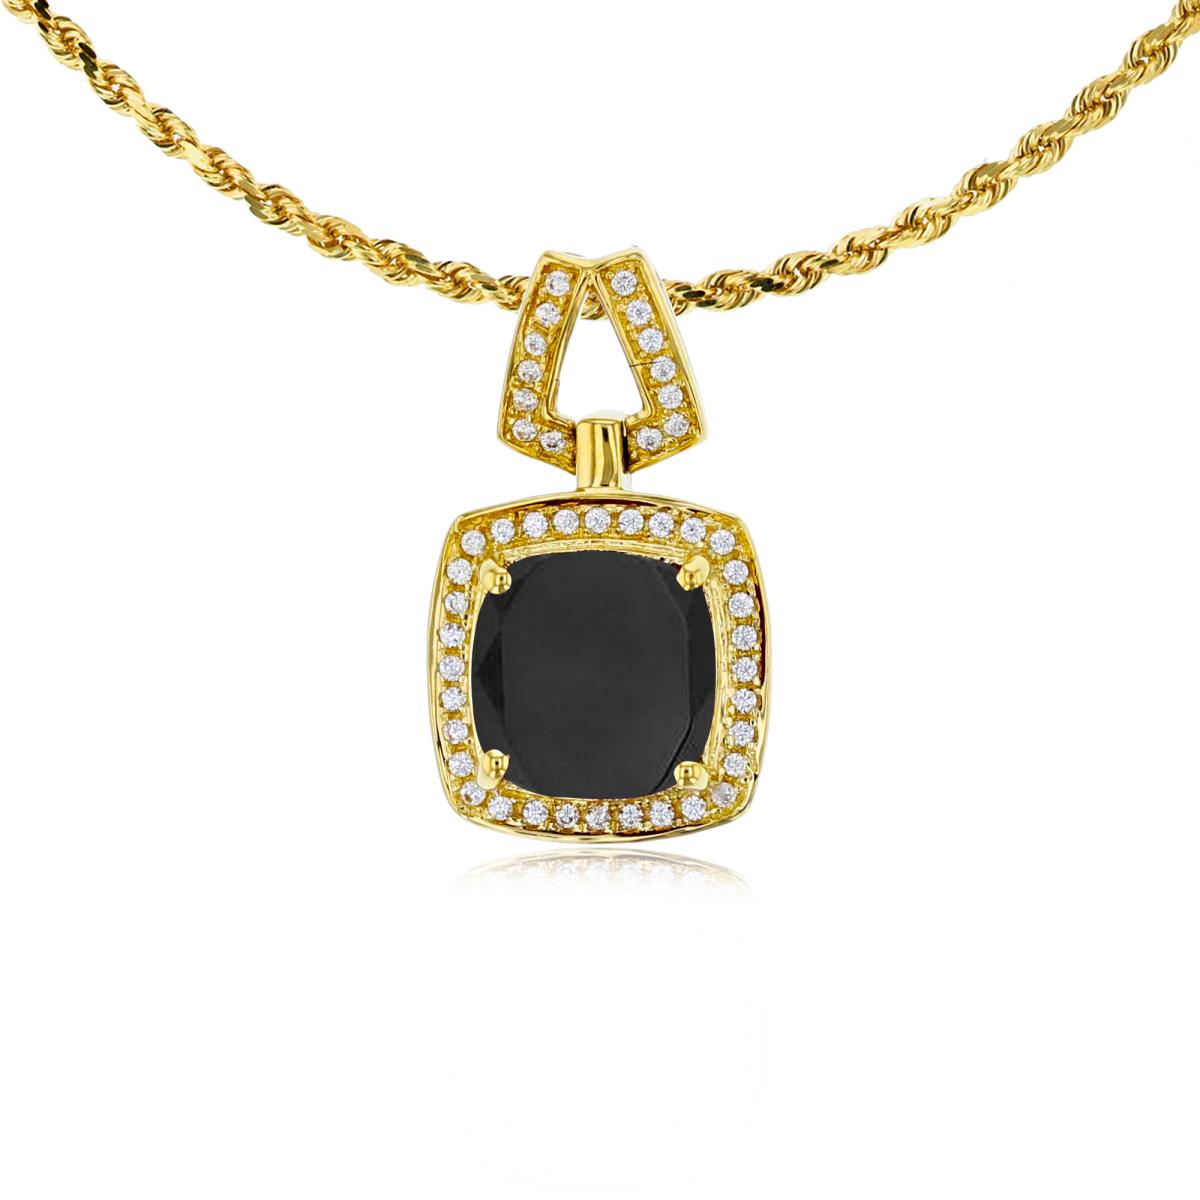 10K Yellow Gold 7mm Cushion Onyx & 0.10 CTTW Diamond Halo 18" Rope Chain Necklace